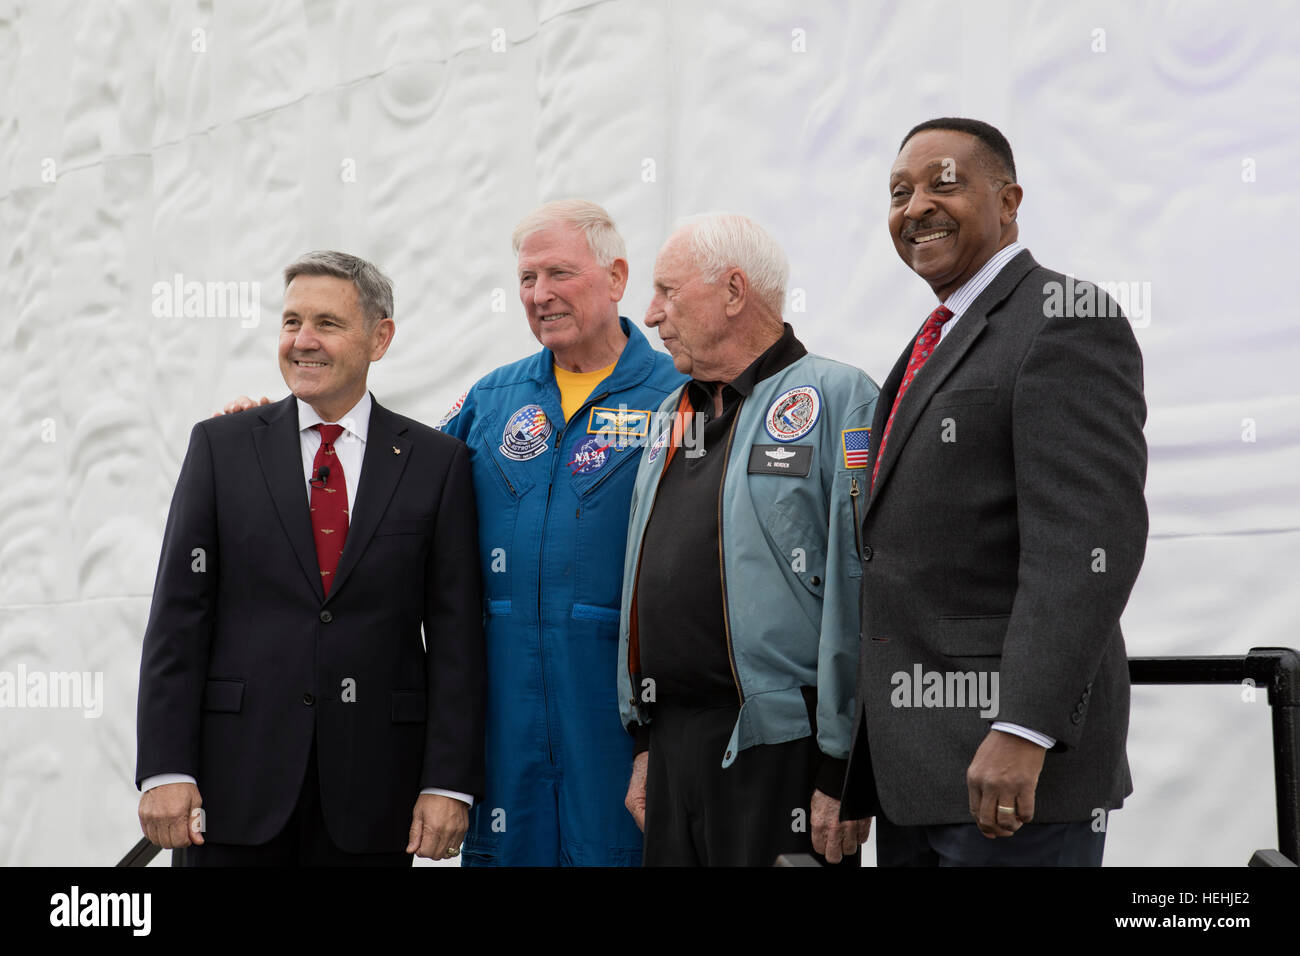 From left to right, NASA Kennedy Space Center Director Robert Cabana, astronauts Jon McBride, Al Worden, and Winston Scott attend the wreath-laying ceremony in honor of former astronaut and U.S. Senator John Glenn at the Kennedy Space Center Visitor Complex Heroes and Legends Exhibit December 9, 2016 in Titusville, Florida. Stock Photo